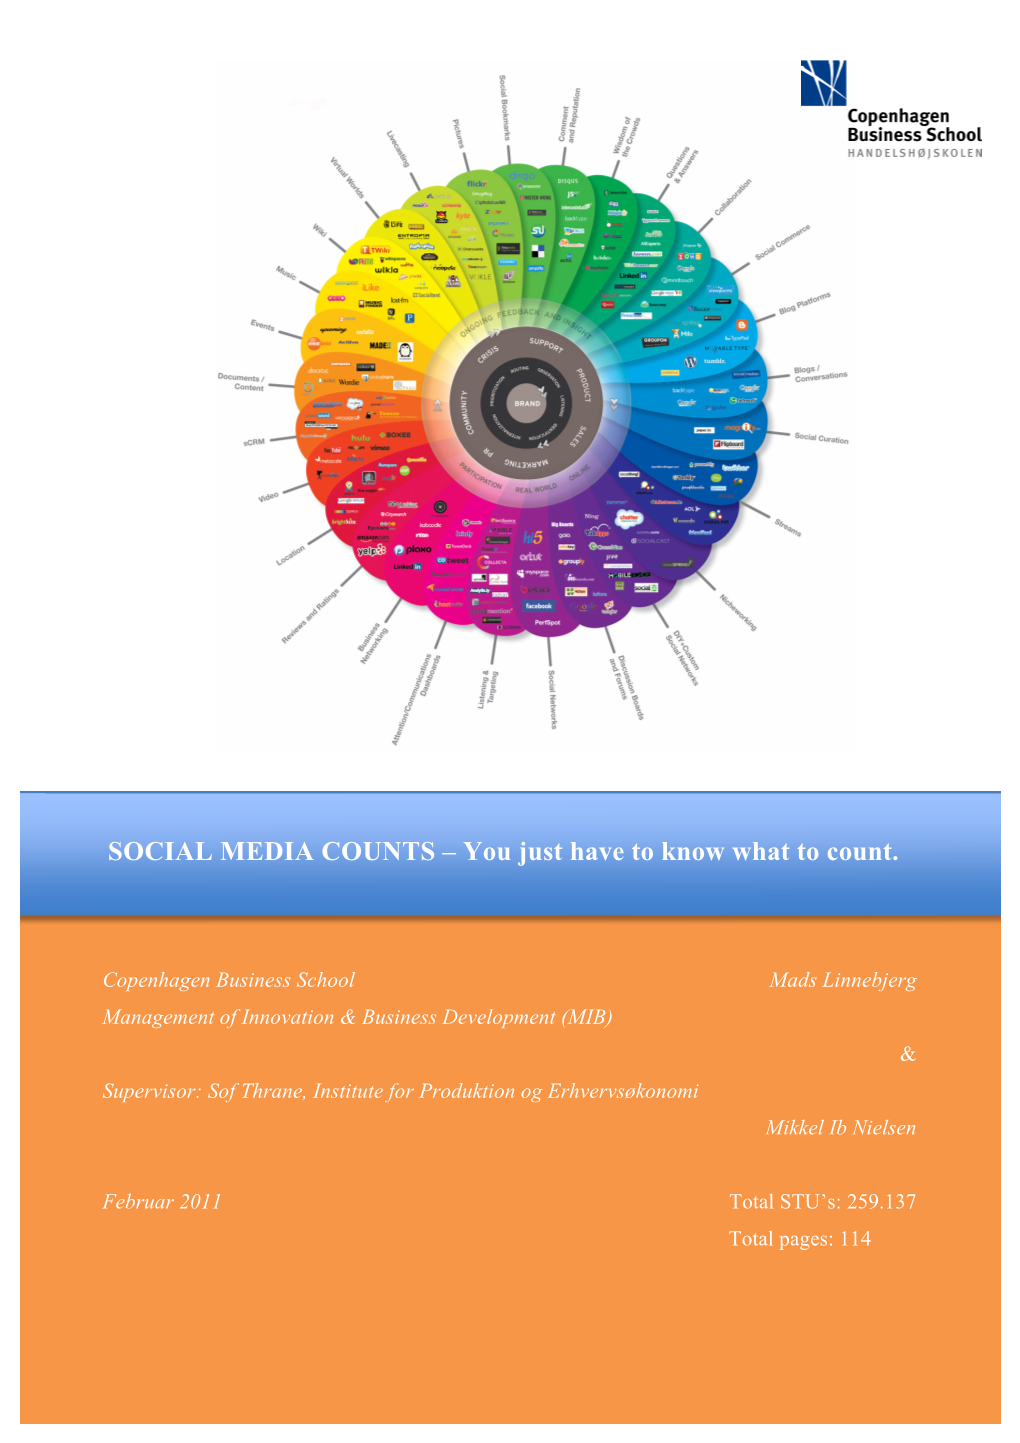 SOCIAL MEDIA COUNTS – You Just Have to Know What to Count